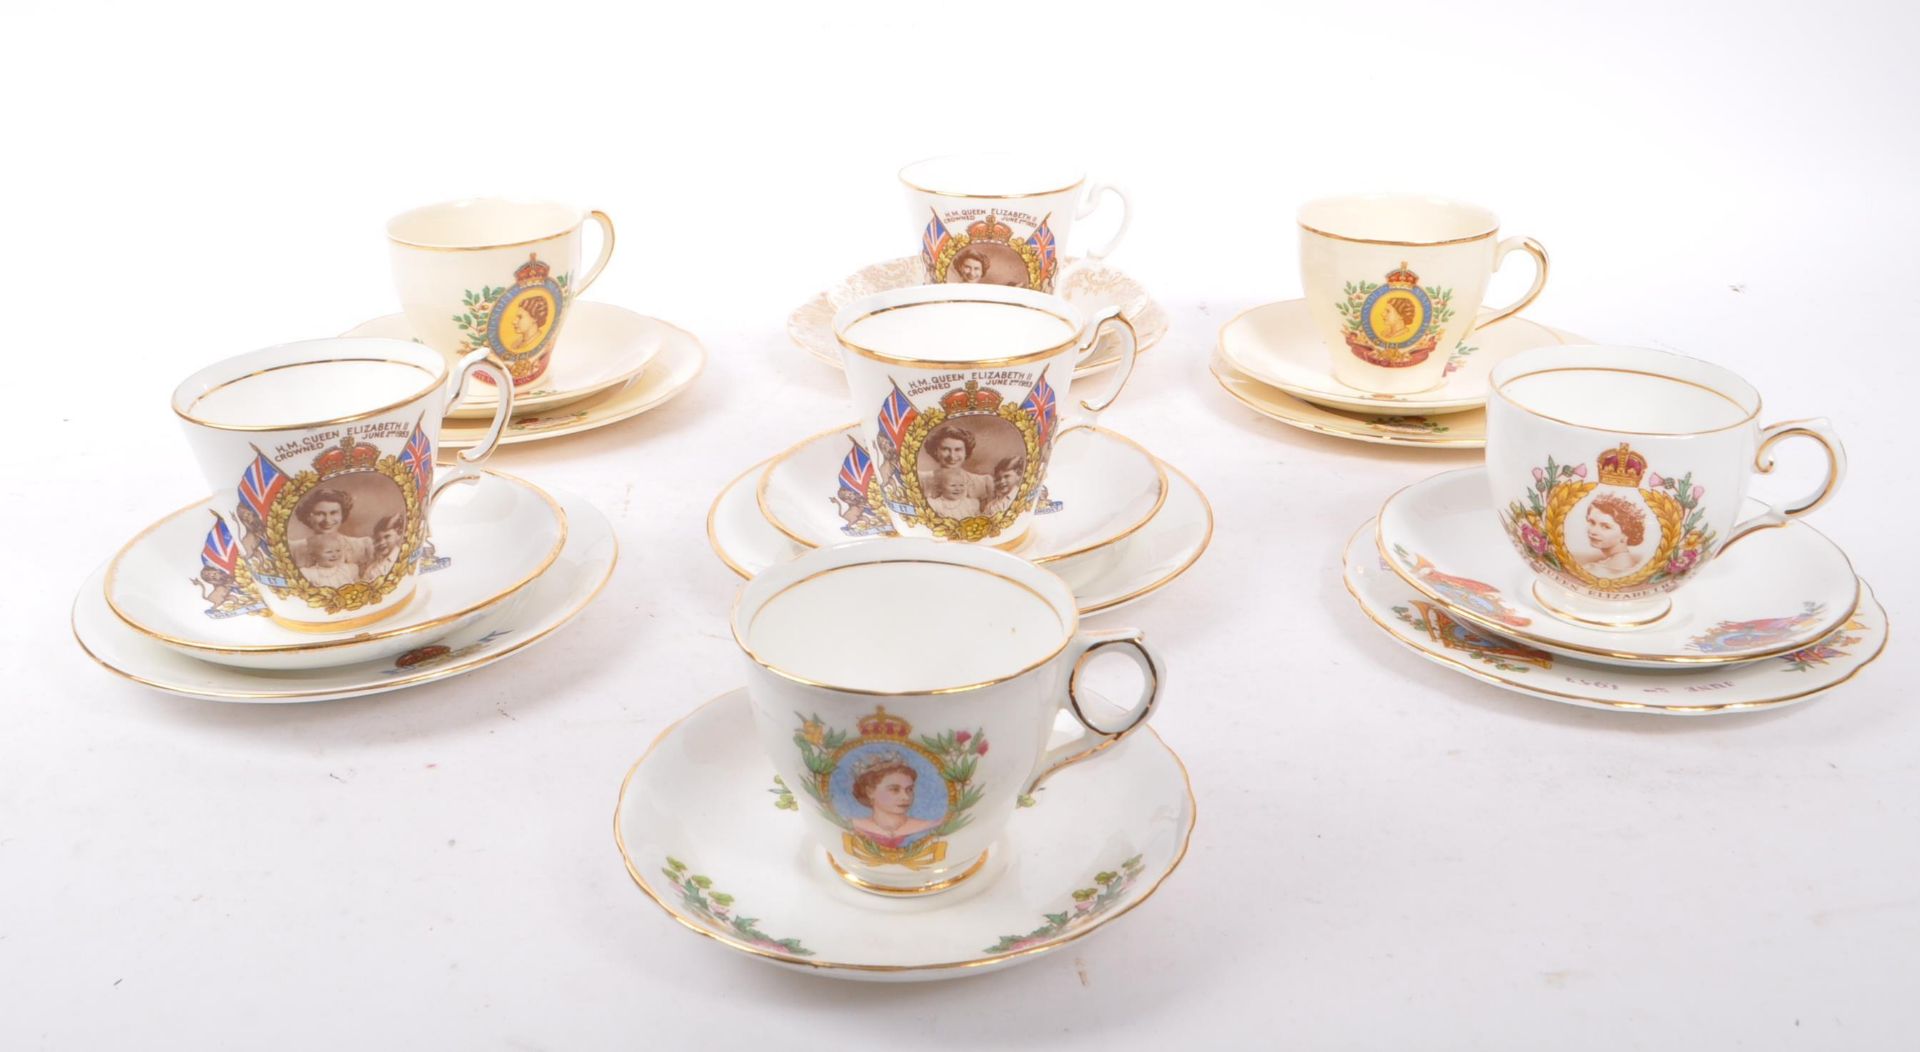 COLLECTION OF QUEEN ELIZABETH II CORONATION CHINA ITEMS